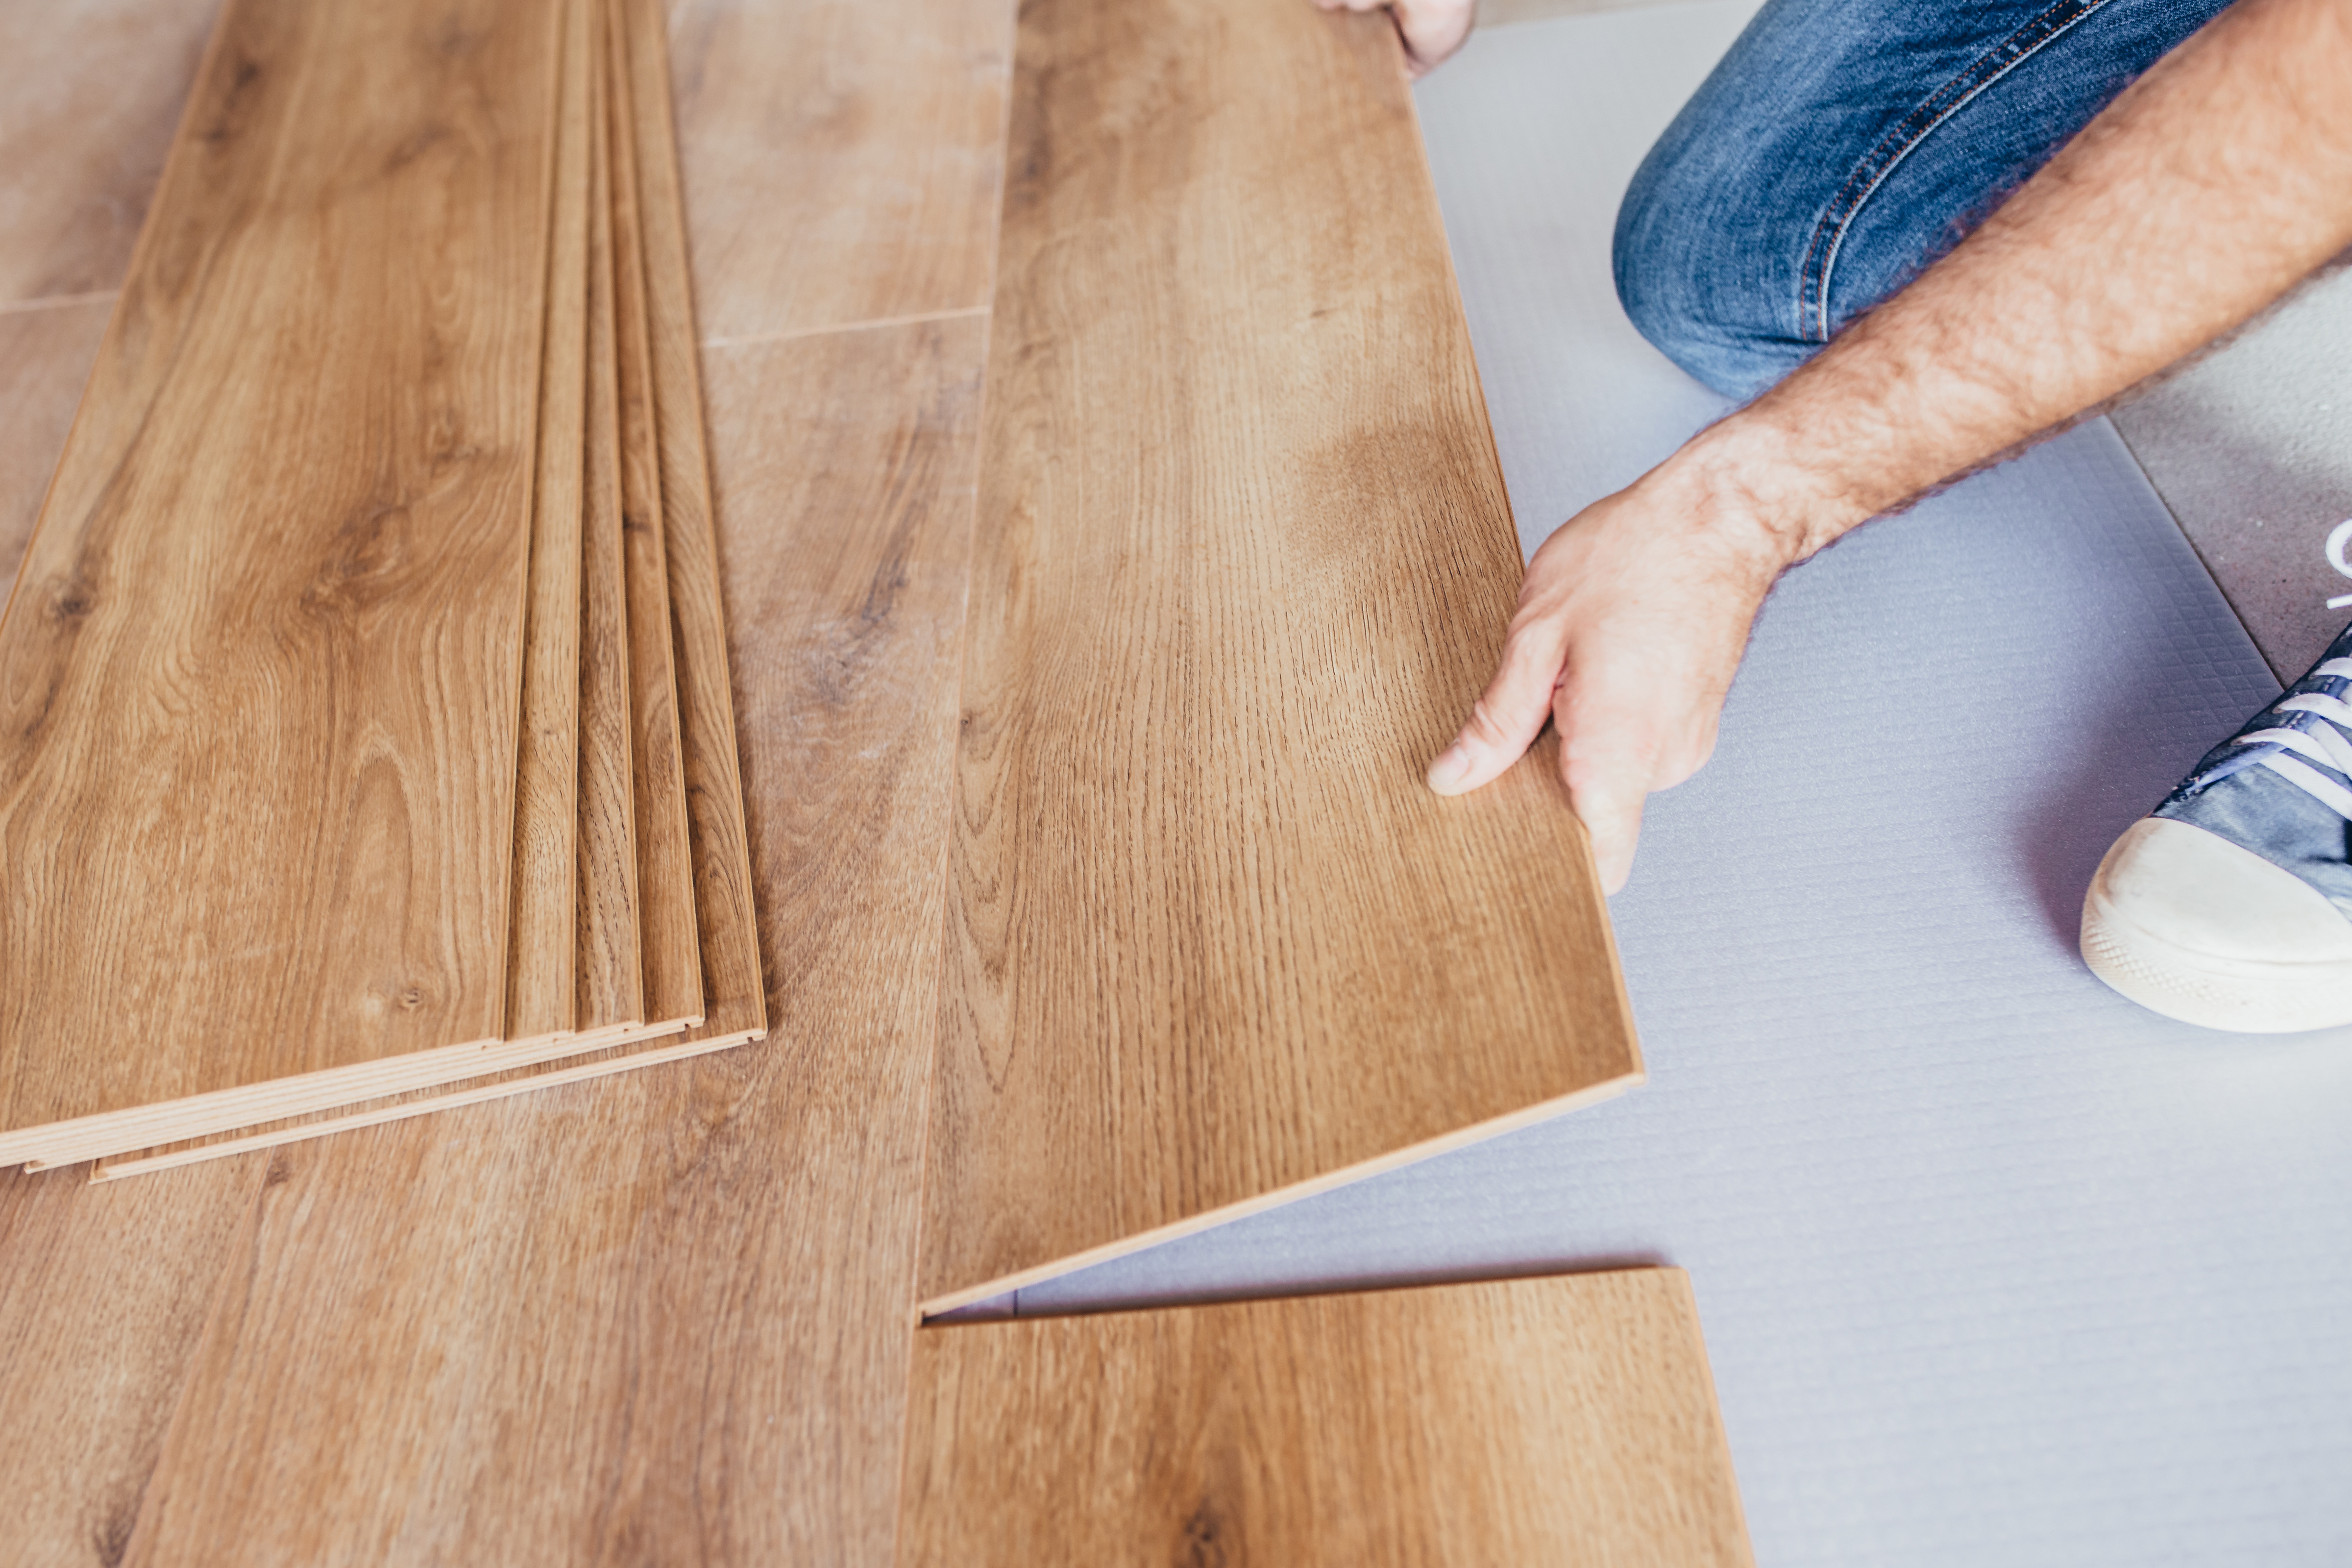 What Is A Floating Floor The Basics, Is It Better To Glue Or Float Hardwood Floors